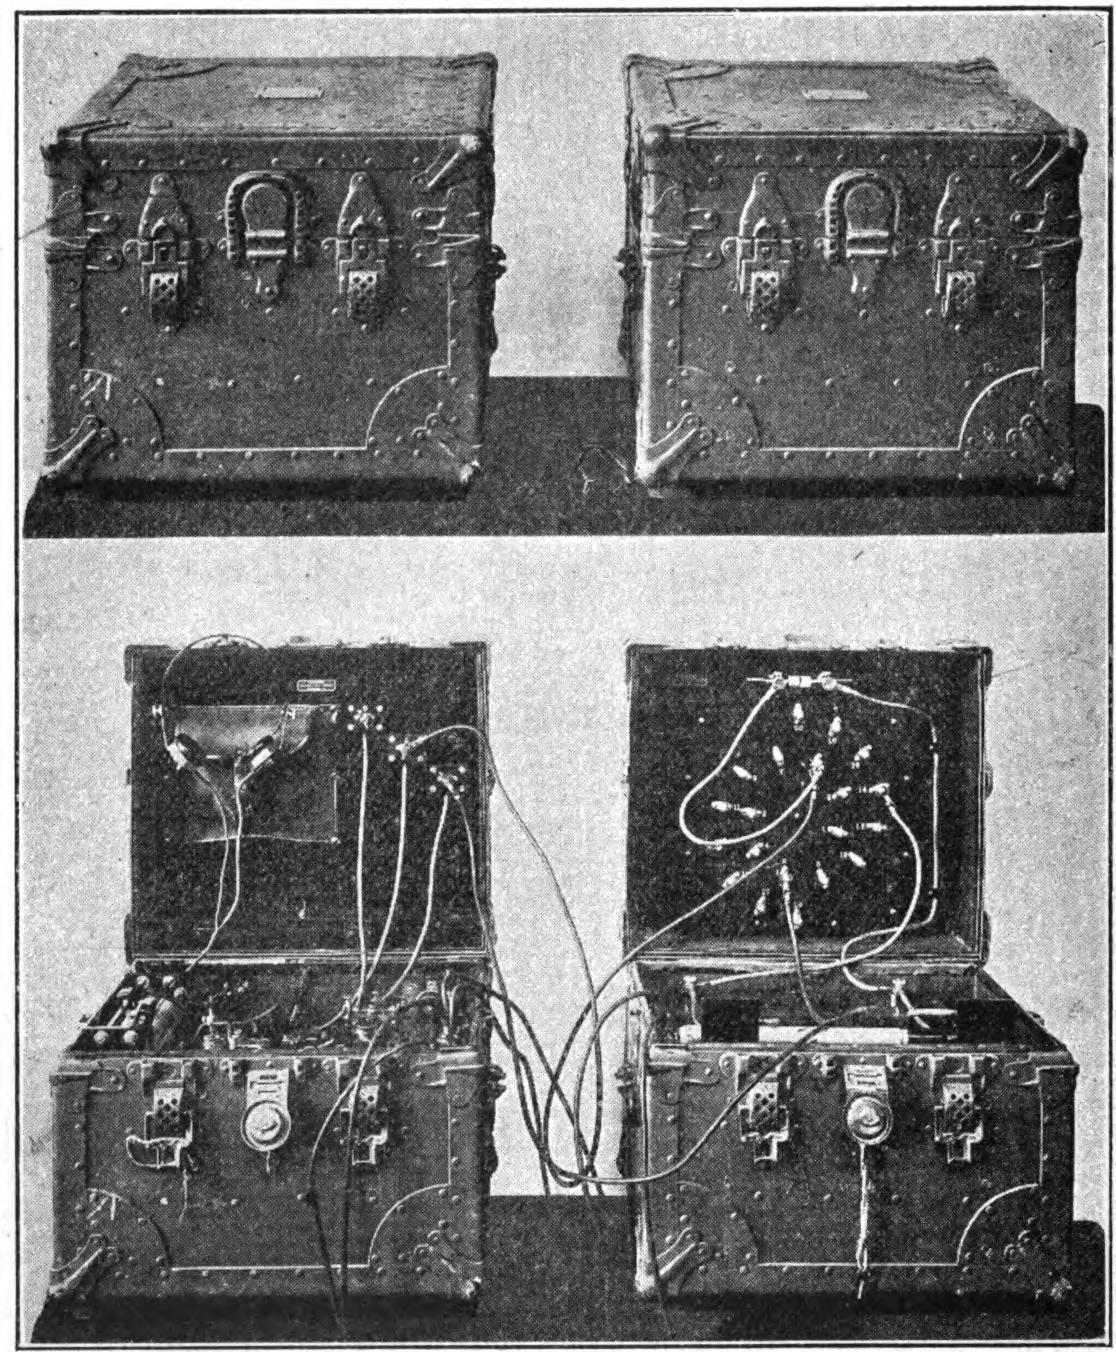 FIG. 108.—U. S. Signal Corps pack sets shown open and closed. Receiving apparatus on the left.